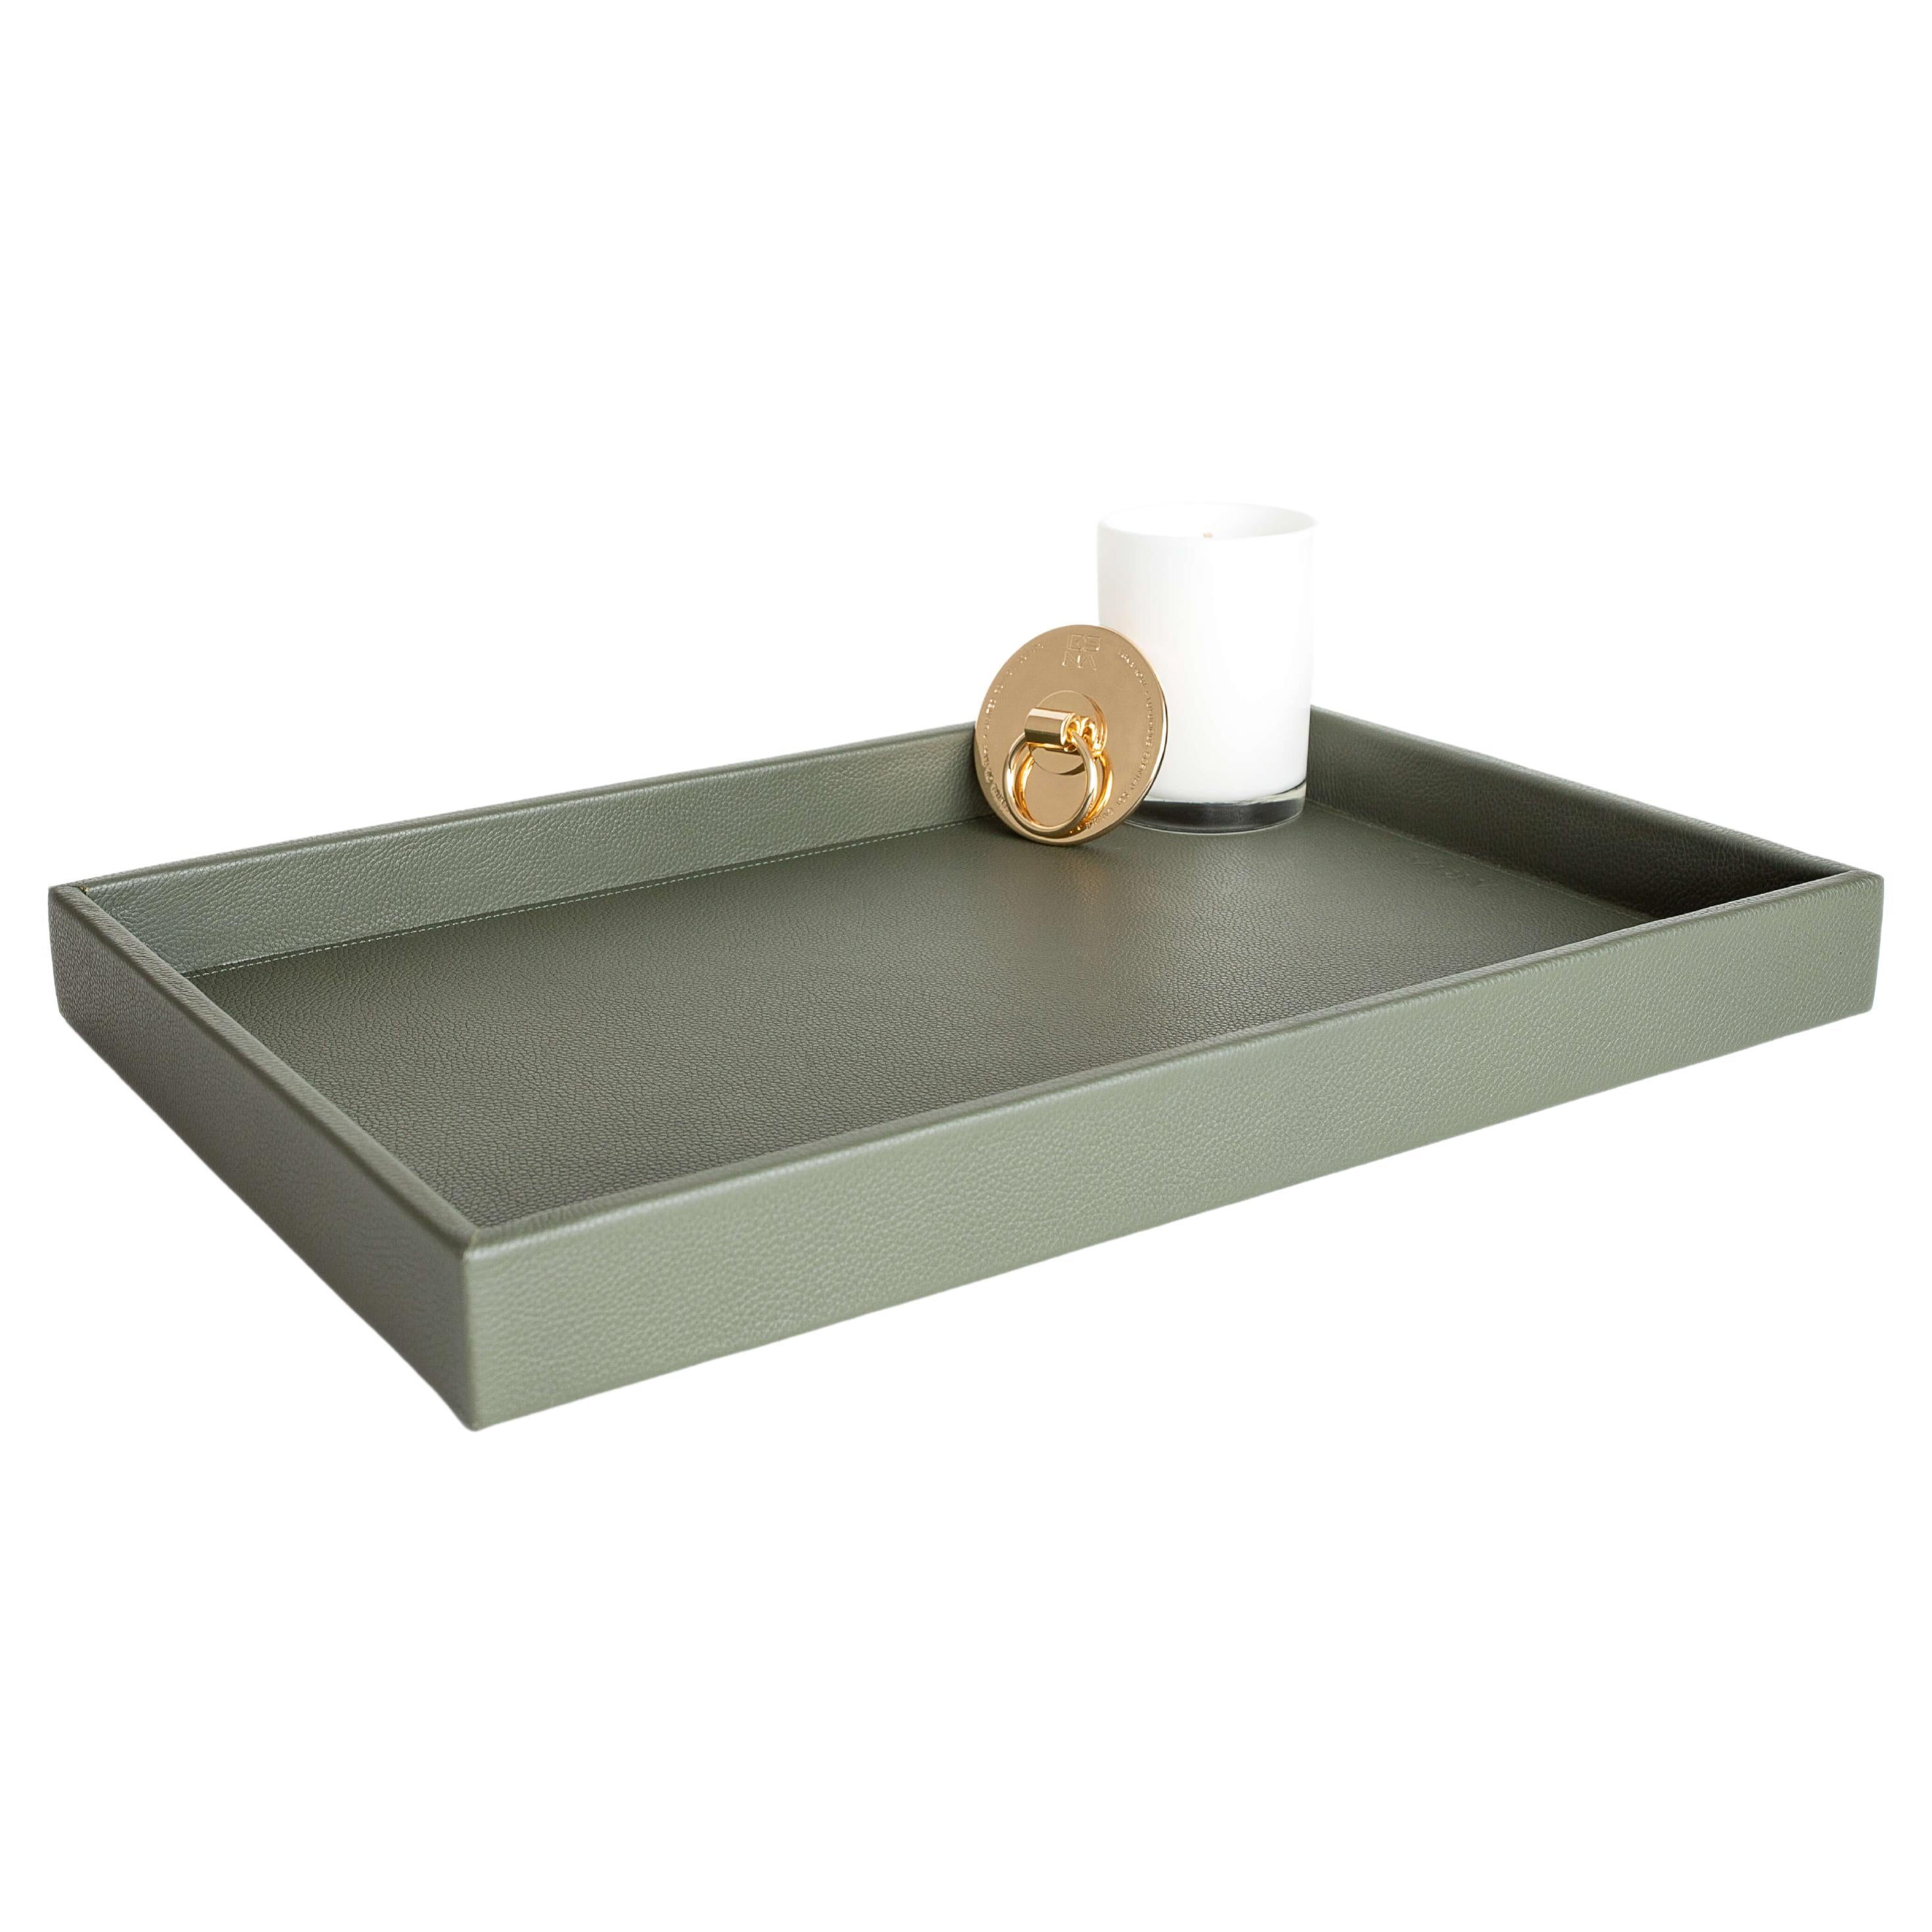 Leather Tray, Large A Rectangular Tray, Handmade in Brazil - Color: Military For Sale